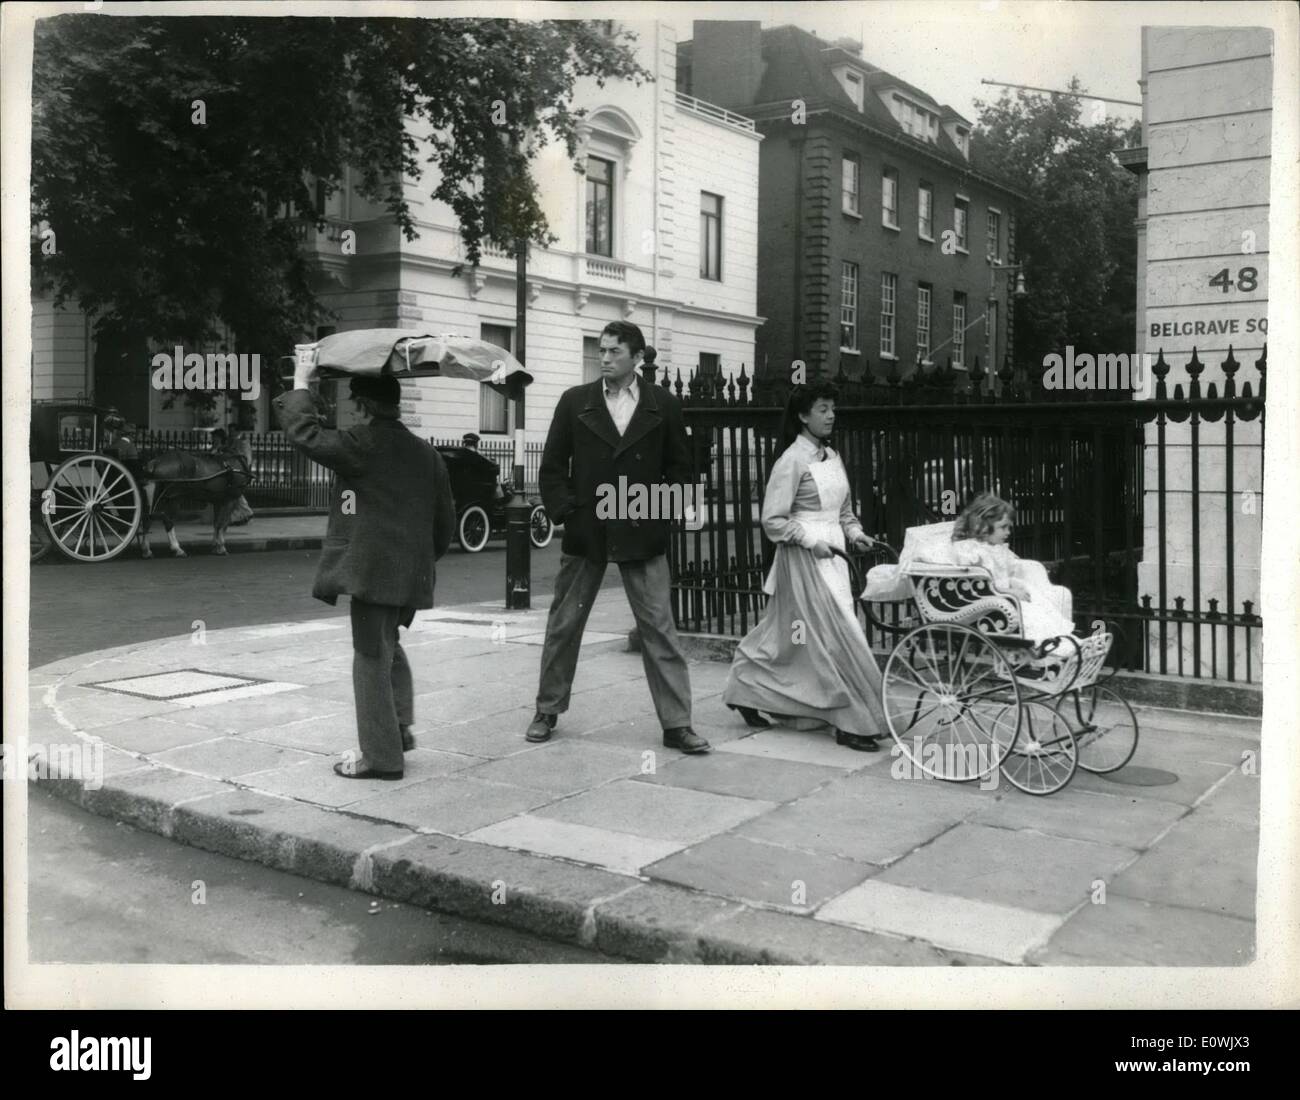 Jun. 06, 1963 - Past Echoes: Sunday morning and London's Belgrave Square waloes to the sound of hansom cabs and a pie man. And - yes, you're right, it's Gregory Peok. They were filming scenes from the new Rank film ''The Million Pound Note''. Three year old Sheridan Williams sits very demurely n her smart carriage. Stock Photo